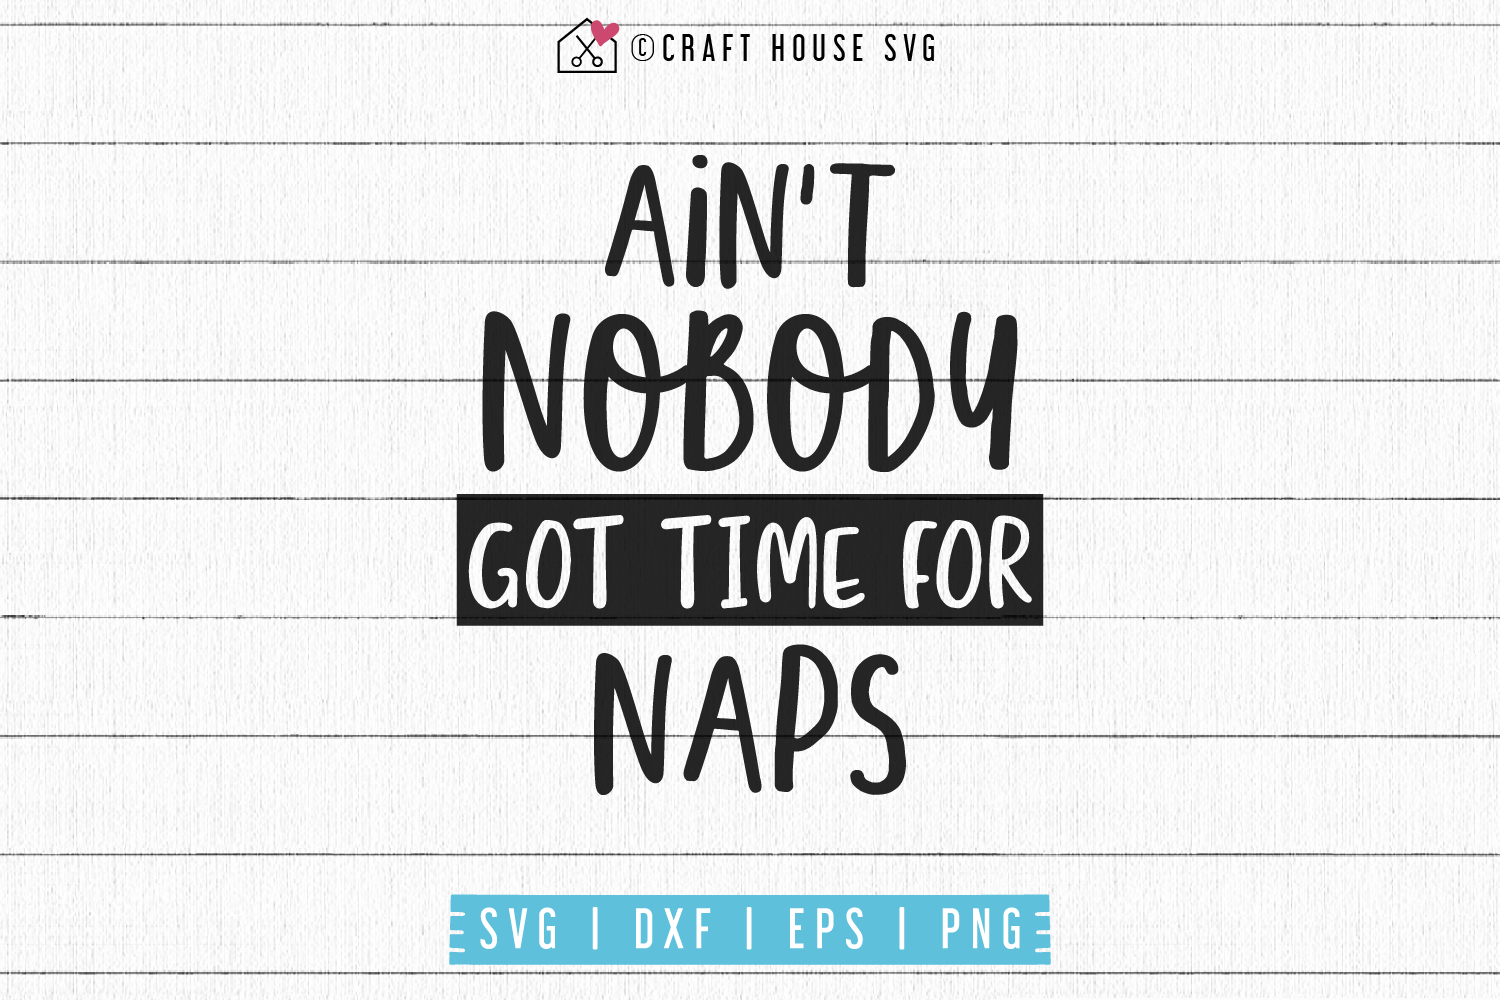 Ain't nobody got time for naps SVG | M53F Craft House SVG - SVG files for Cricut and Silhouette